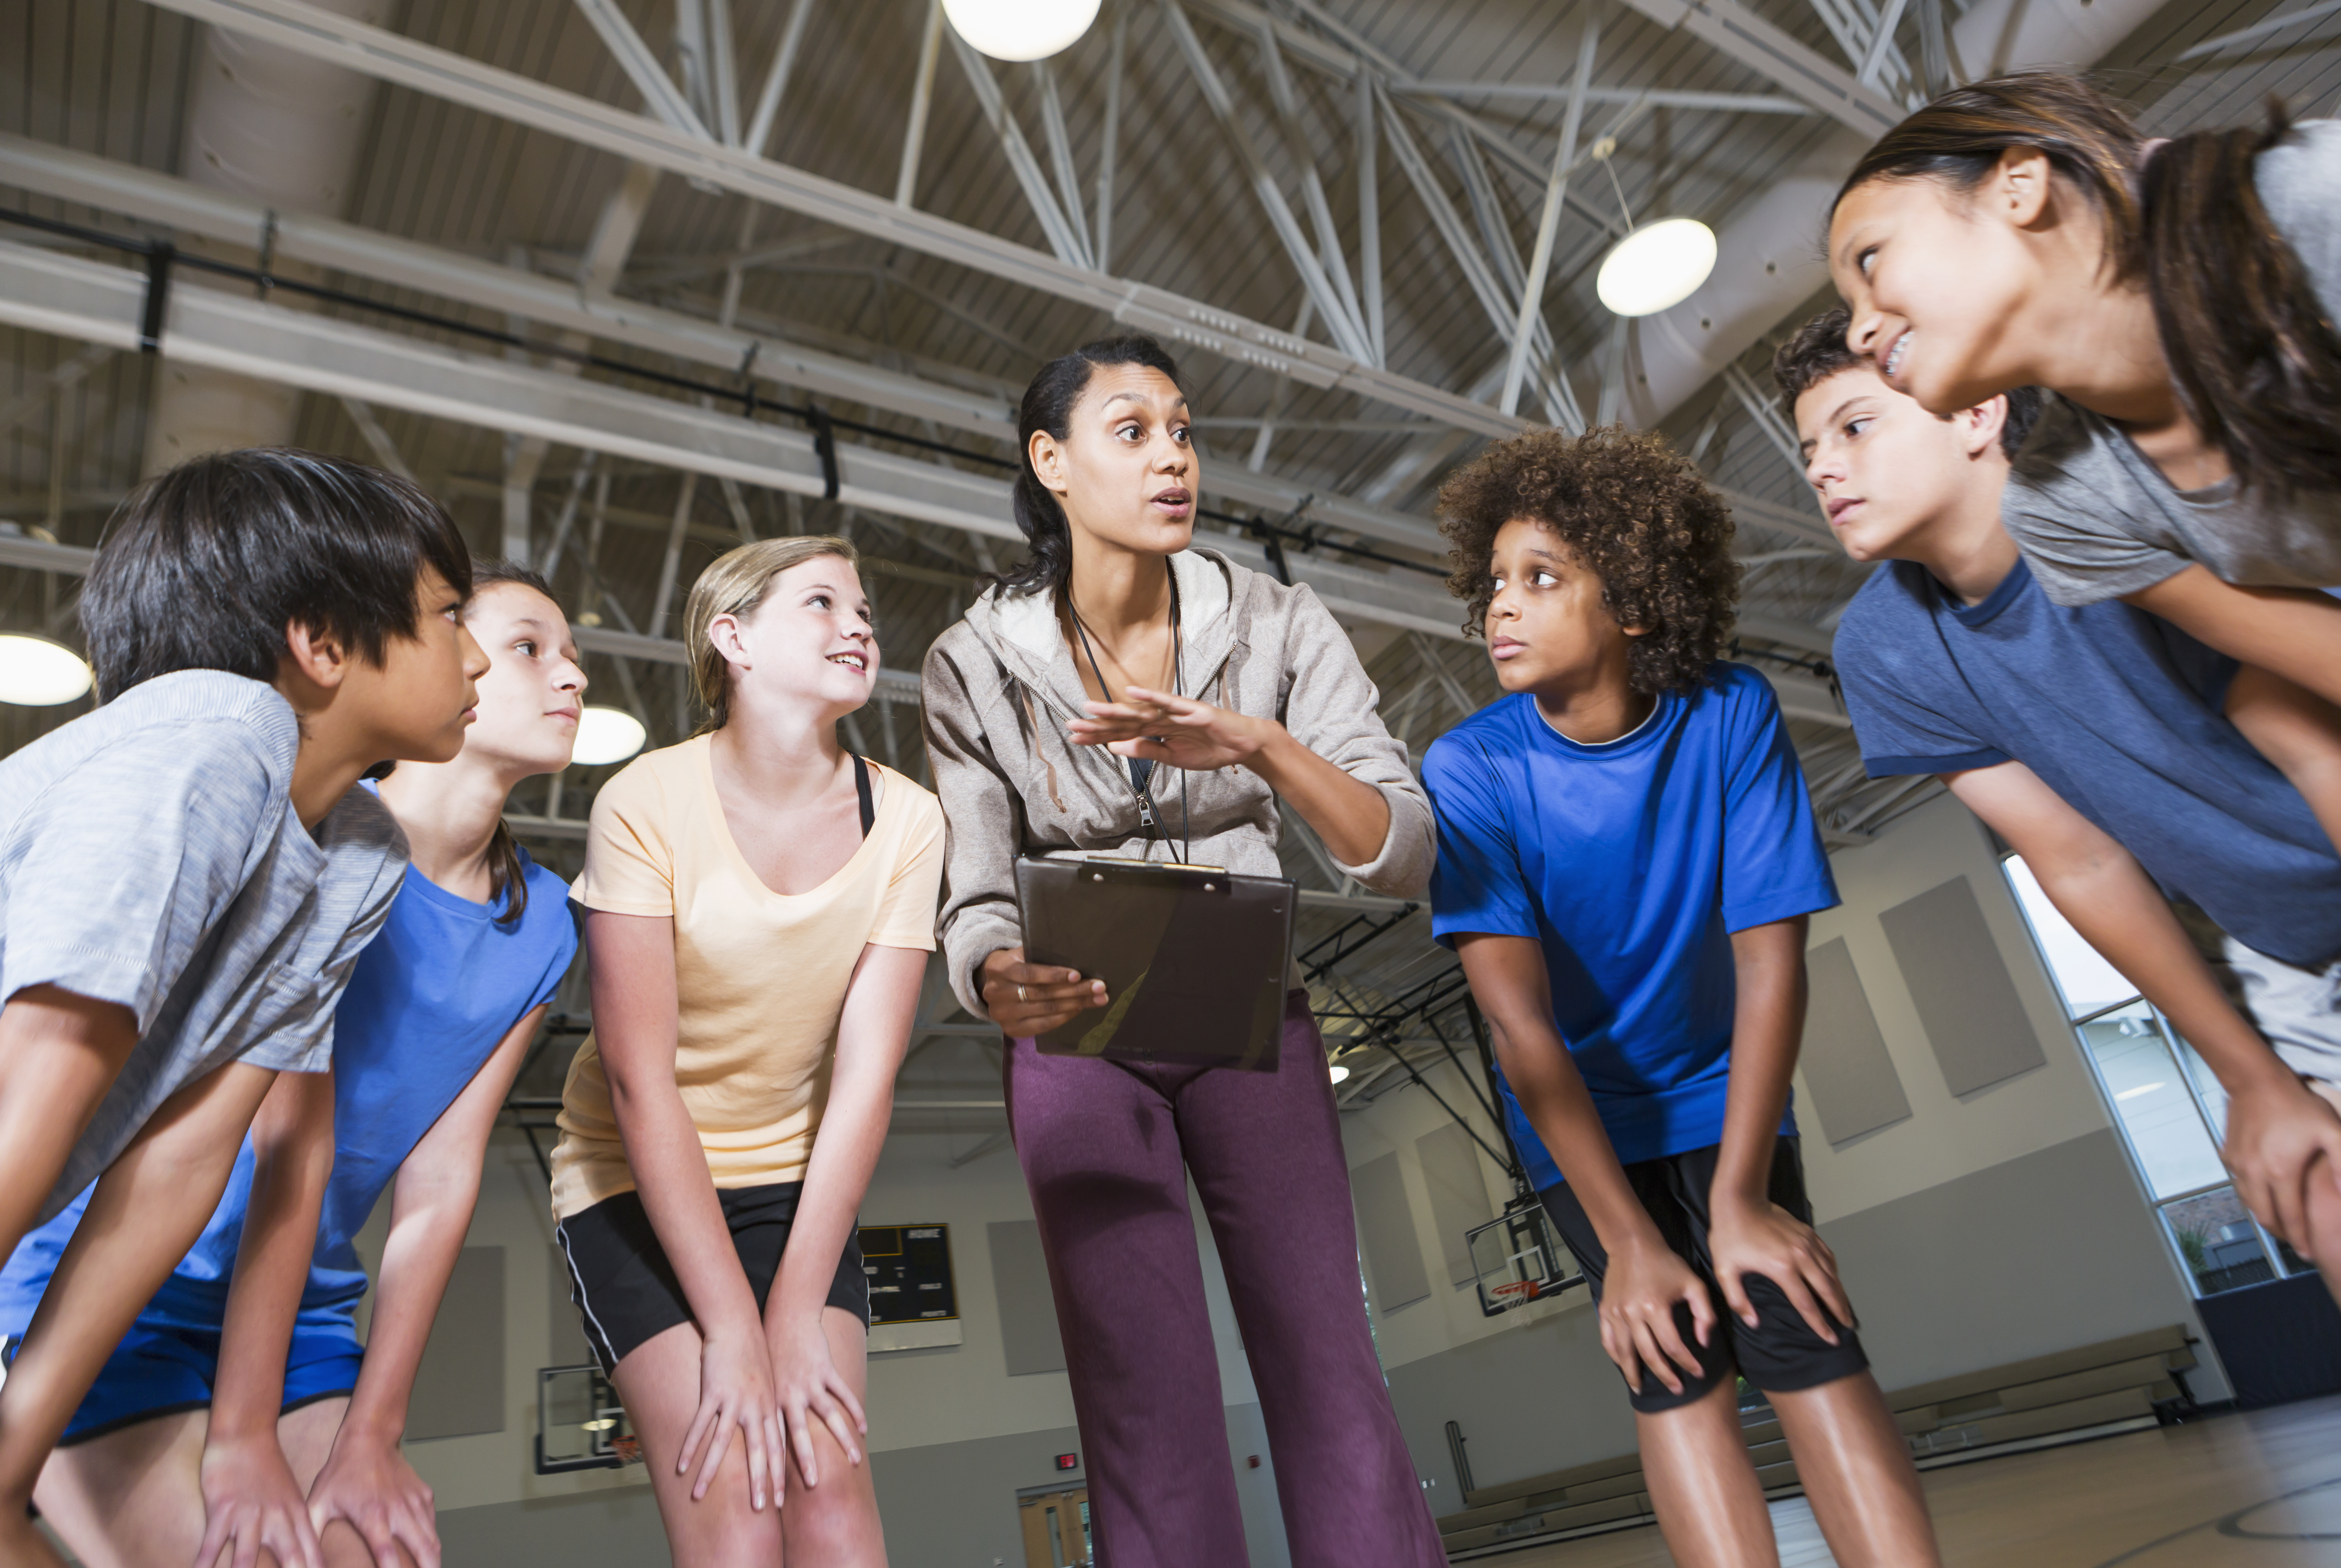 A teacher and a group of students stand in a huddle in the middle of a gymnasium. The teacher is holding a clipboard and speaking to the students, who are listening intently. Everyone in the photo is wearing athletic clothing.